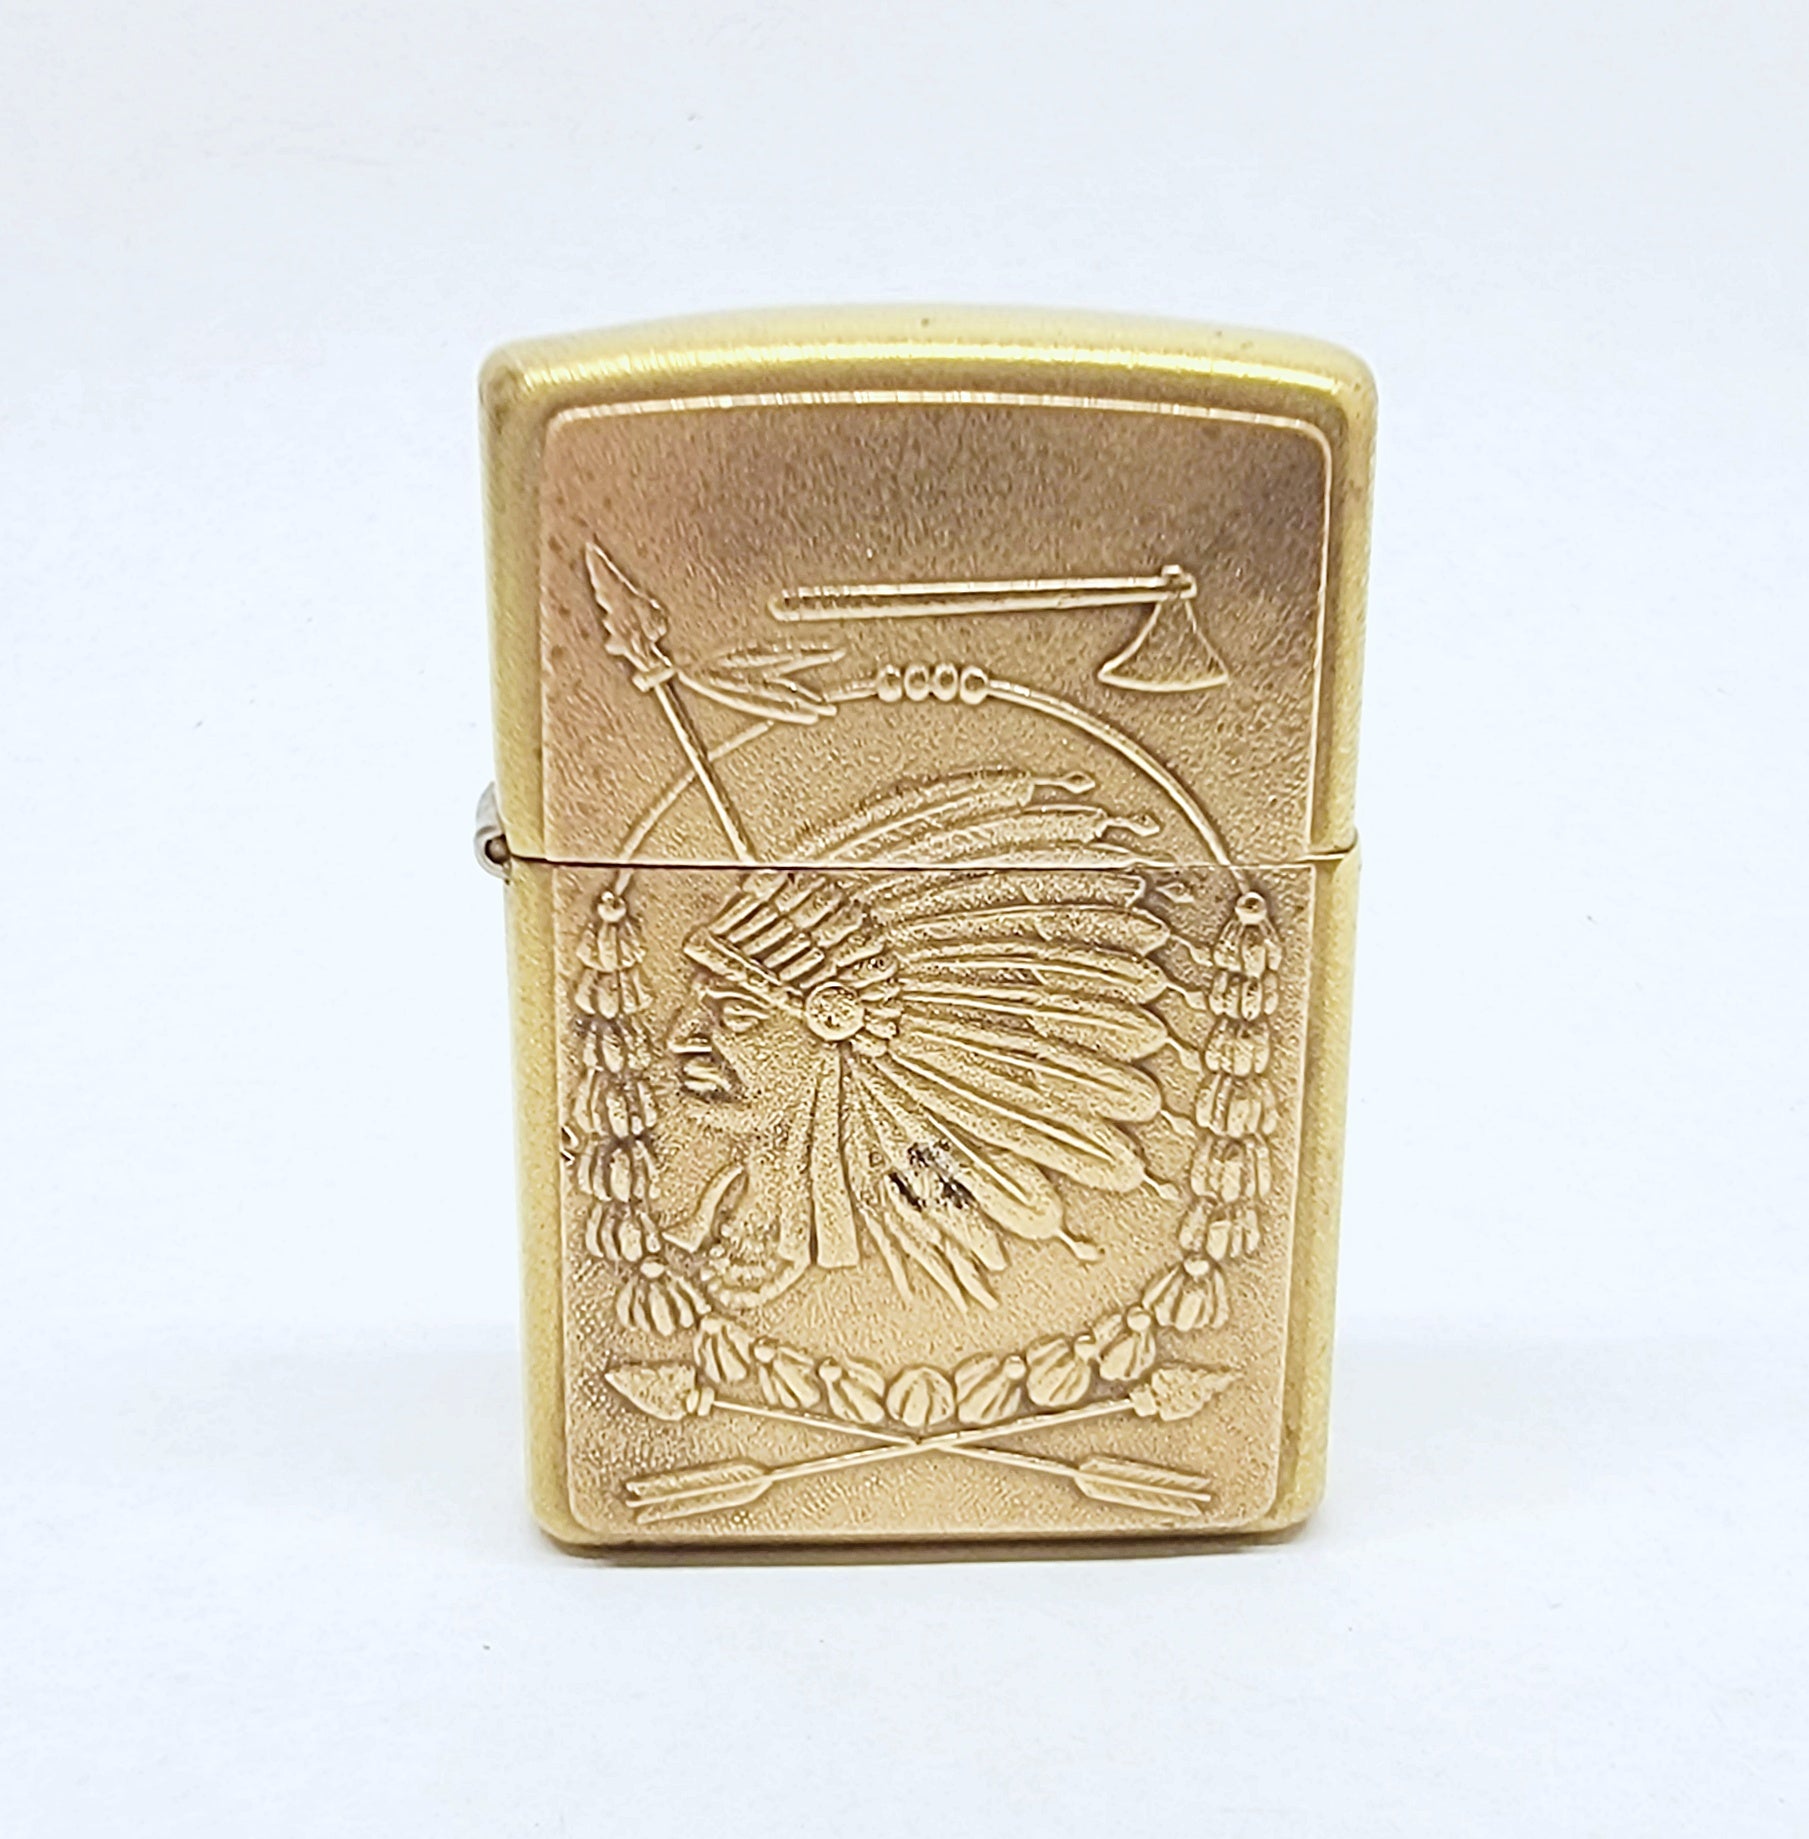 1998 XIV Brass Barrett Smythe Native American Indian Chief Zippo Lighter - Hers and His Treasures